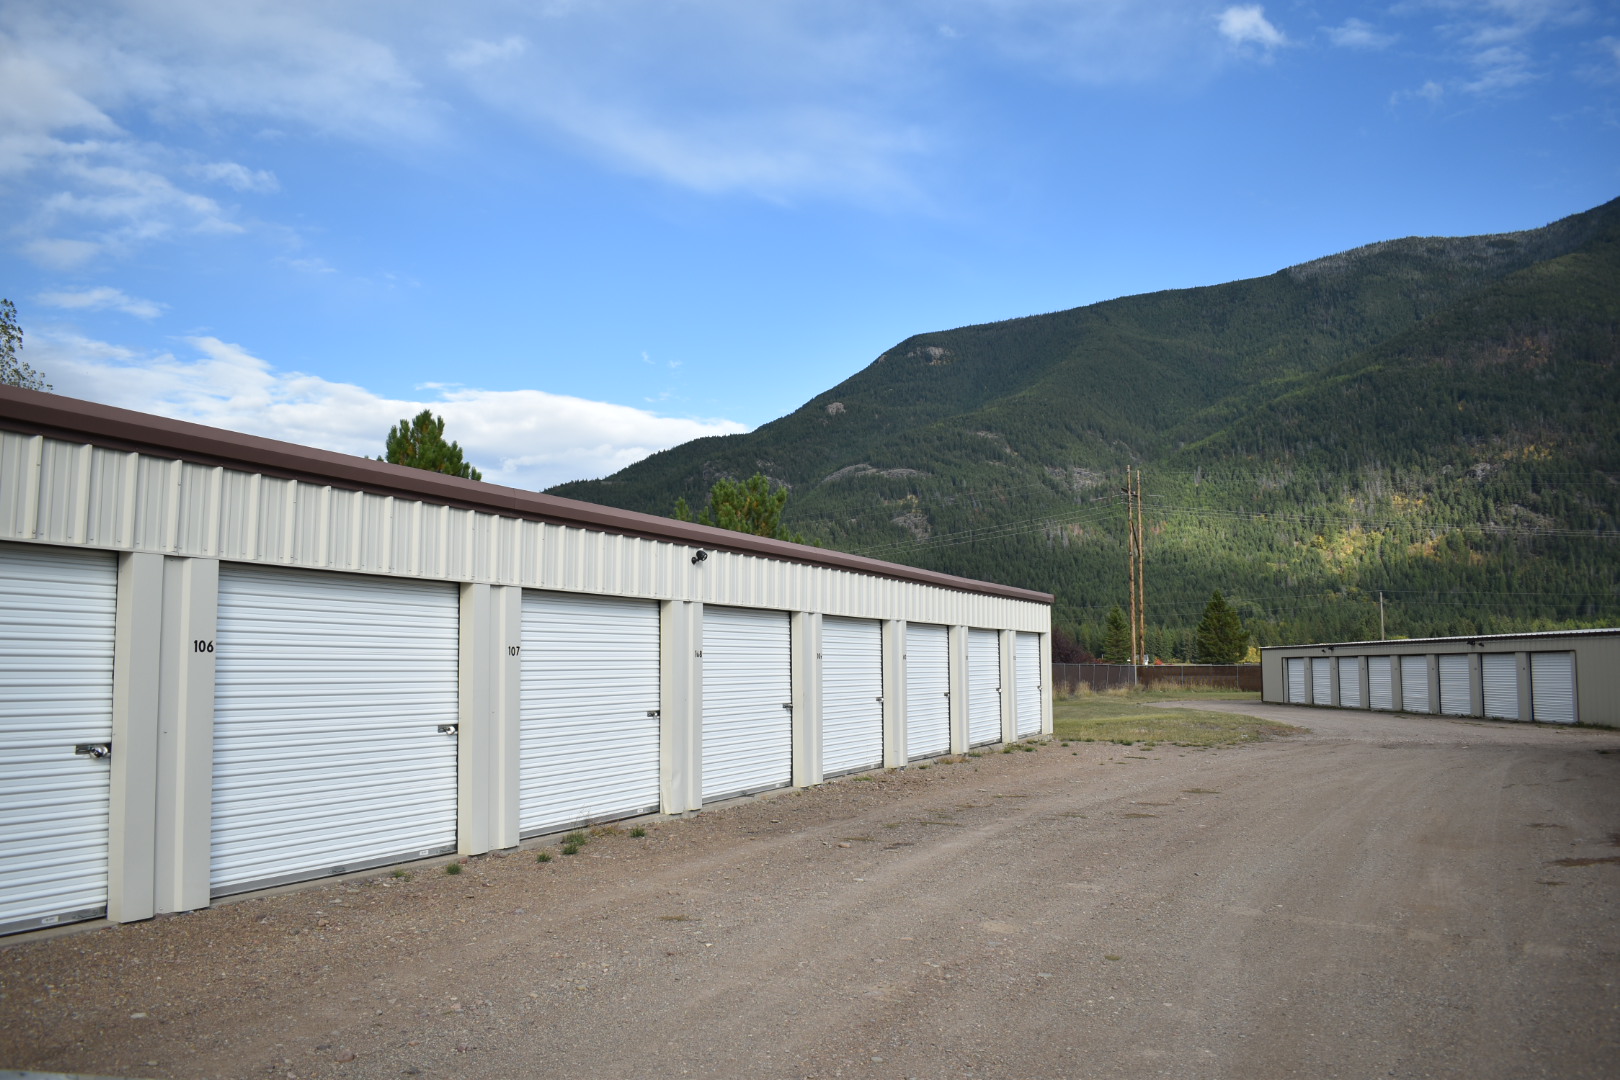 self storage units with drive up access doors